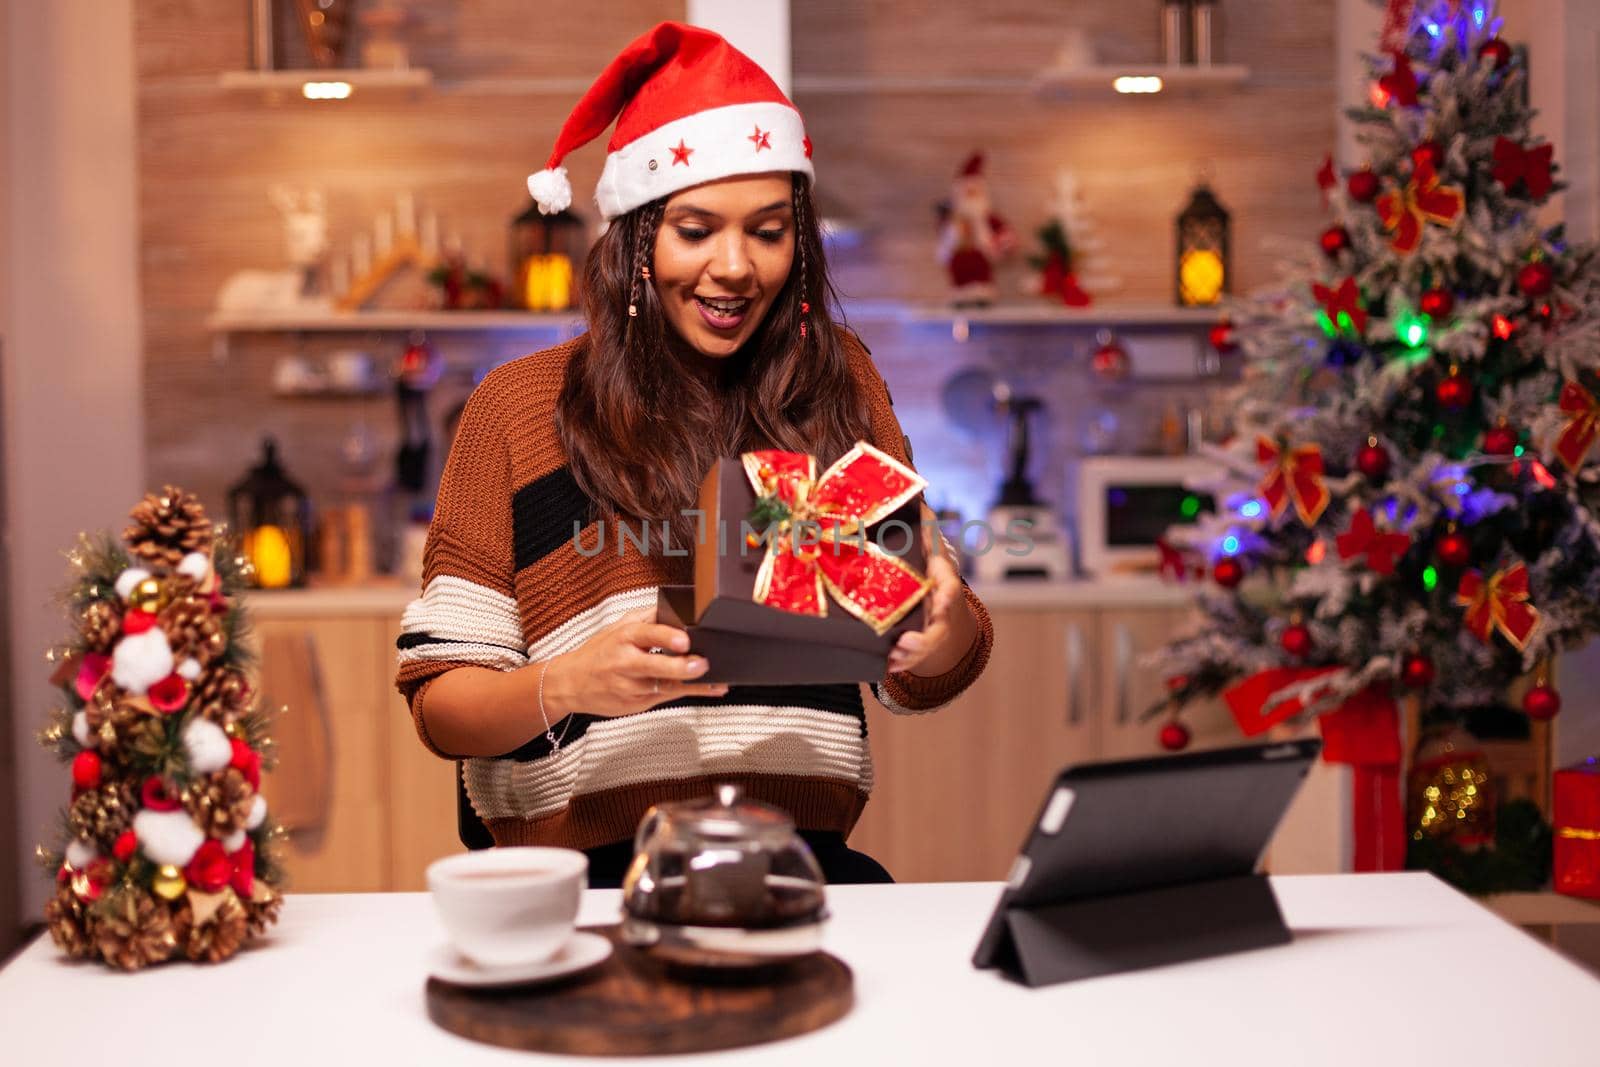 Happy woman opening gift box while on online video call conference with family using tablet. Caucasian adult with santa hat receiving present feeling cheerful at christmas decorated home